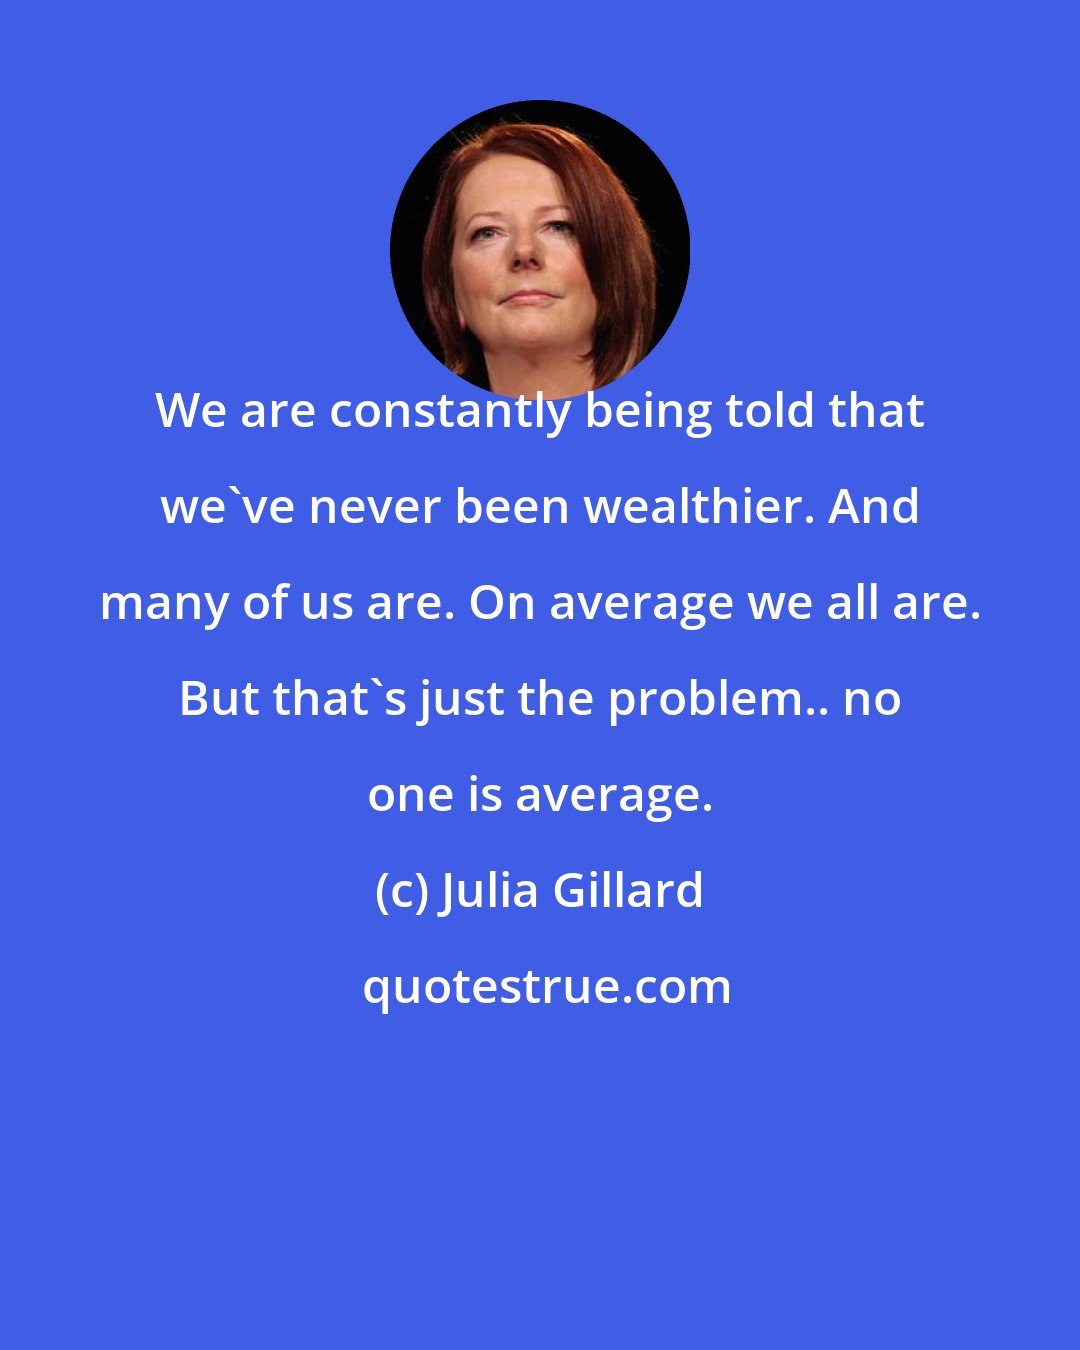 Julia Gillard: We are constantly being told that we've never been wealthier. And many of us are. On average we all are. But that's just the problem.. no one is average.